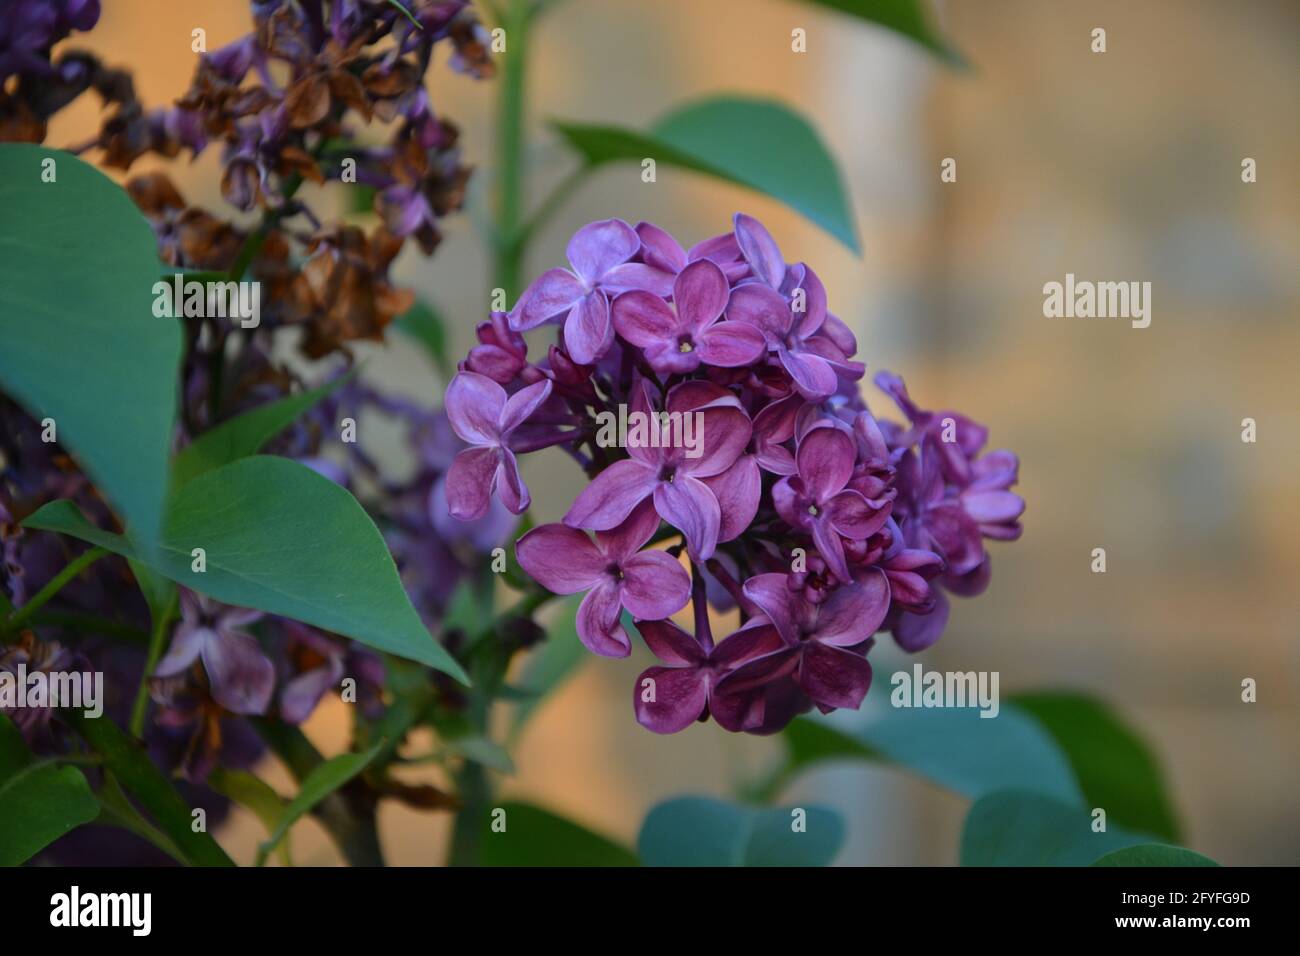 Fresh Lilac and Dried Lilac UK. Purely Beautiful and Peaceful Floral Space Stock Photo